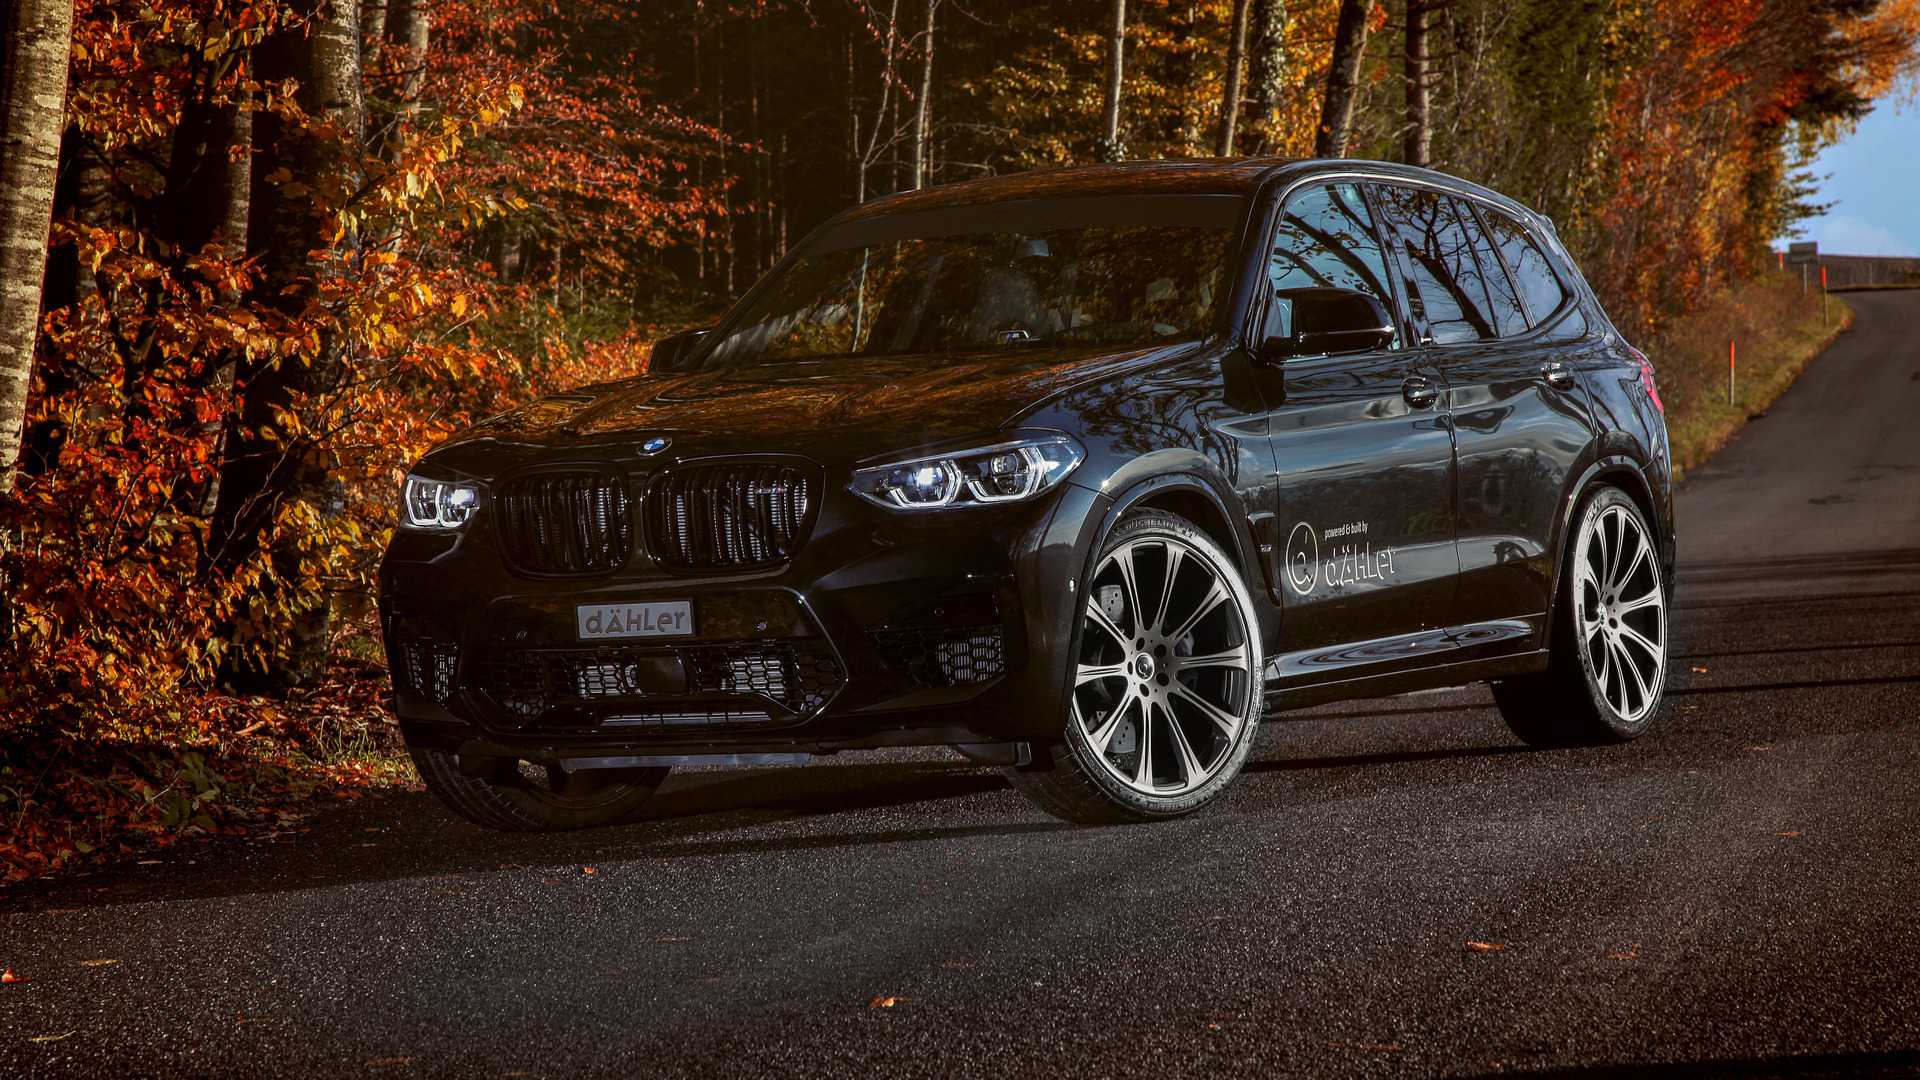 BMW X3 M Competition up to 630 horses (470 kW). but now its Dahler’s turn w...